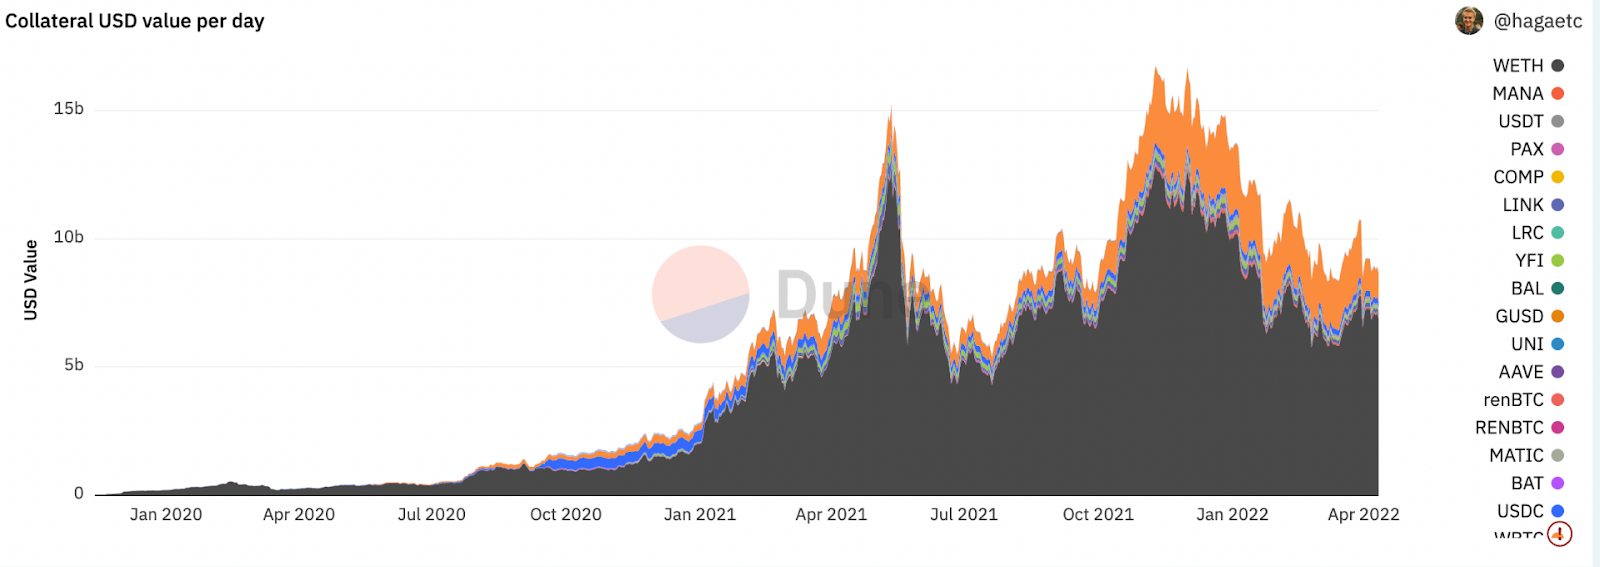 Dune Analytics chart showing how much U.S. dollar’s worth of cryptos have been collatoralized in MakerVaults since January 2020.